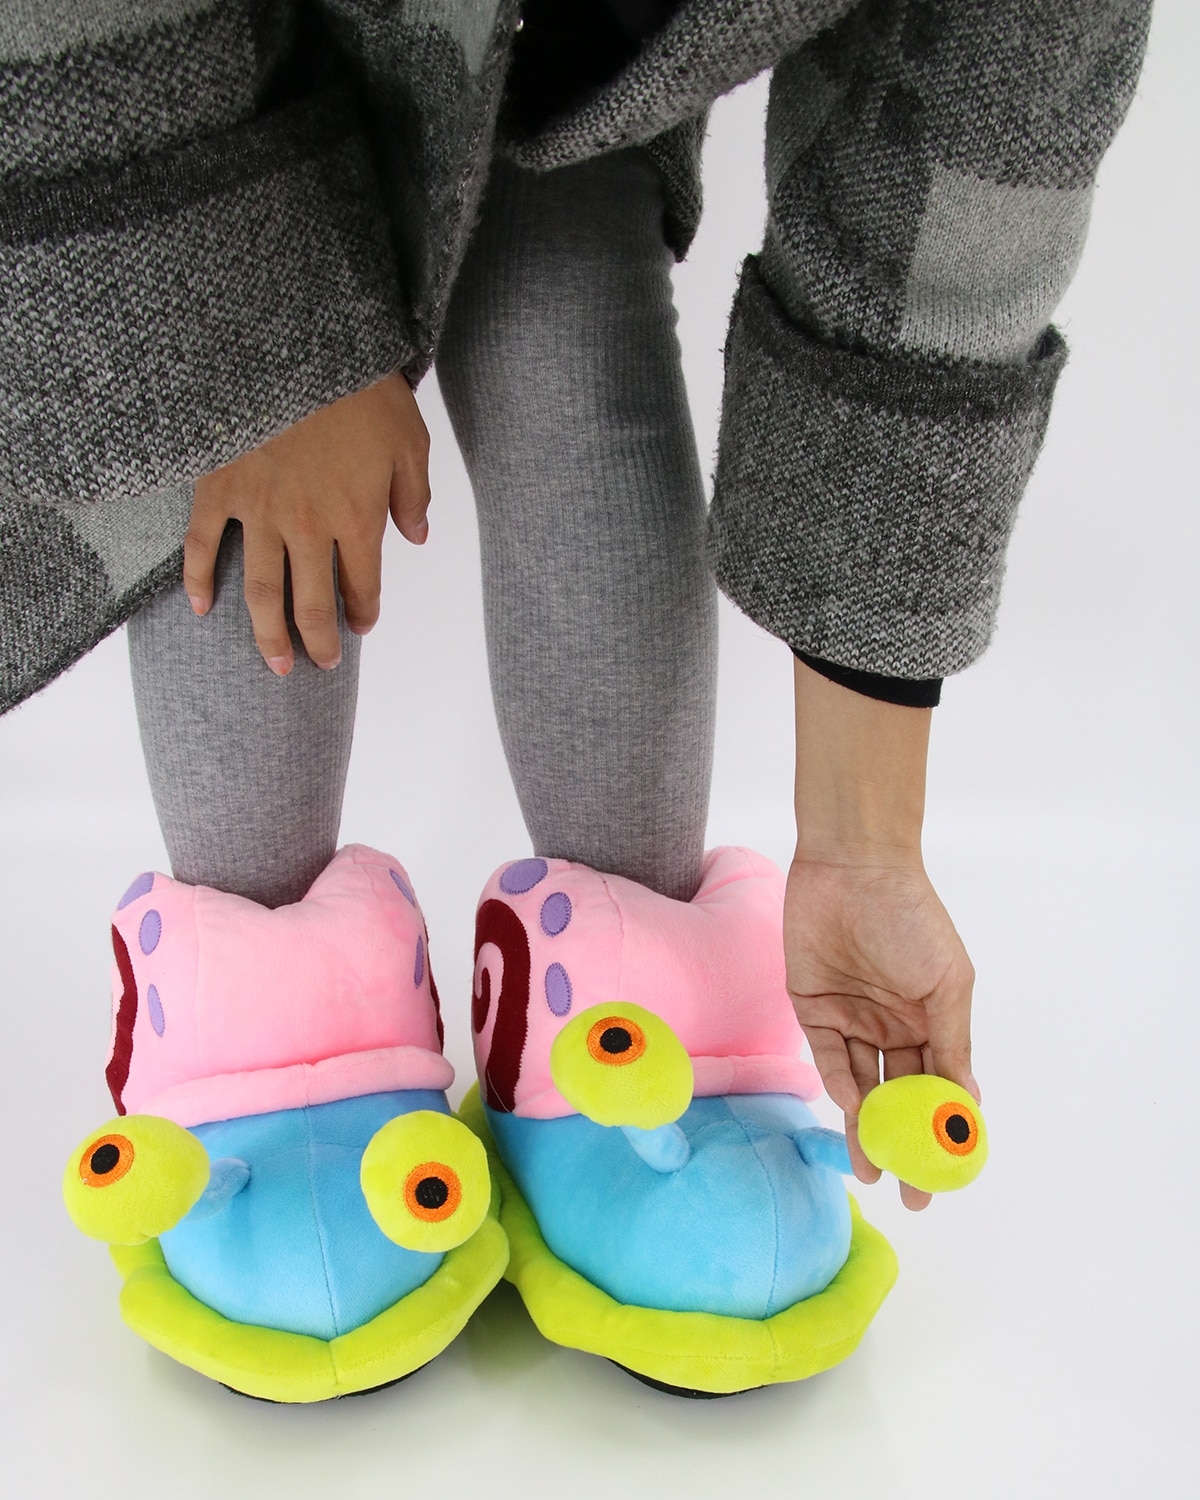 Winter Childrens Slippers Kids Snails Slippers Cute Cartoon Home Shoes Girls Warm House Indoor Animal Plush Slippers Funny Shoes